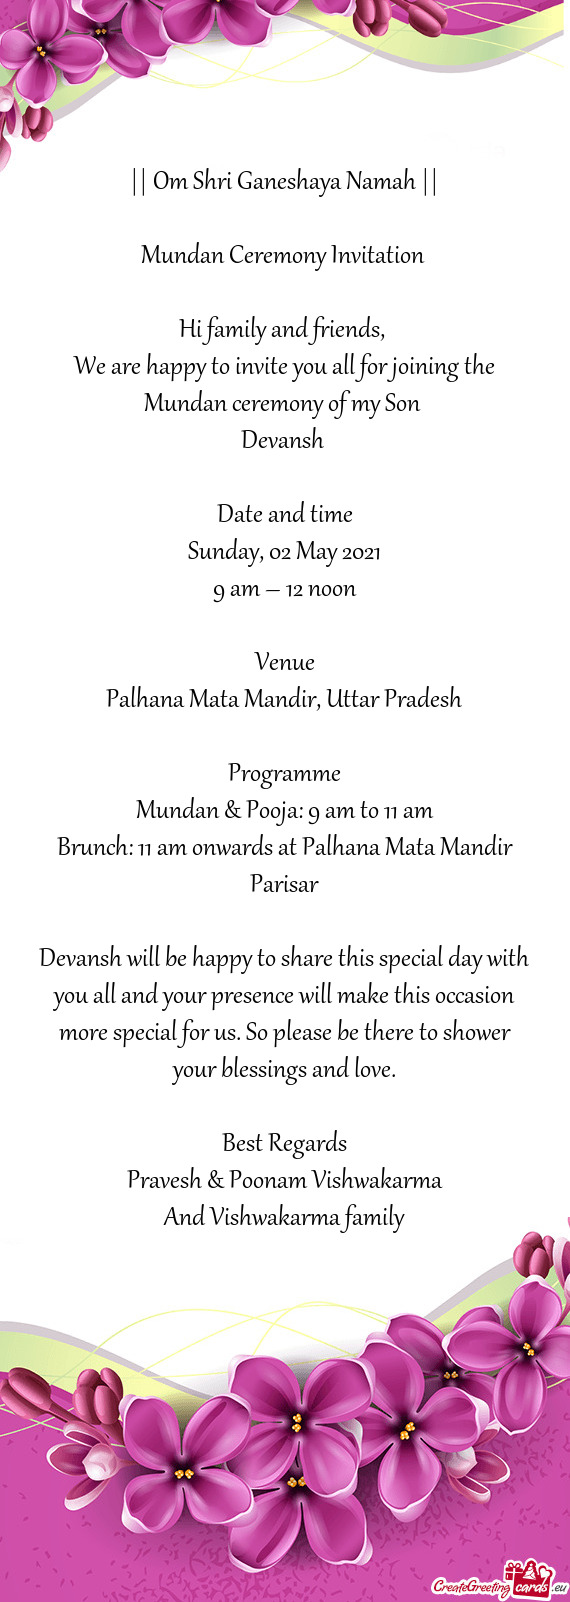 We are happy to invite you all for joining the Mundan ceremony of my Son